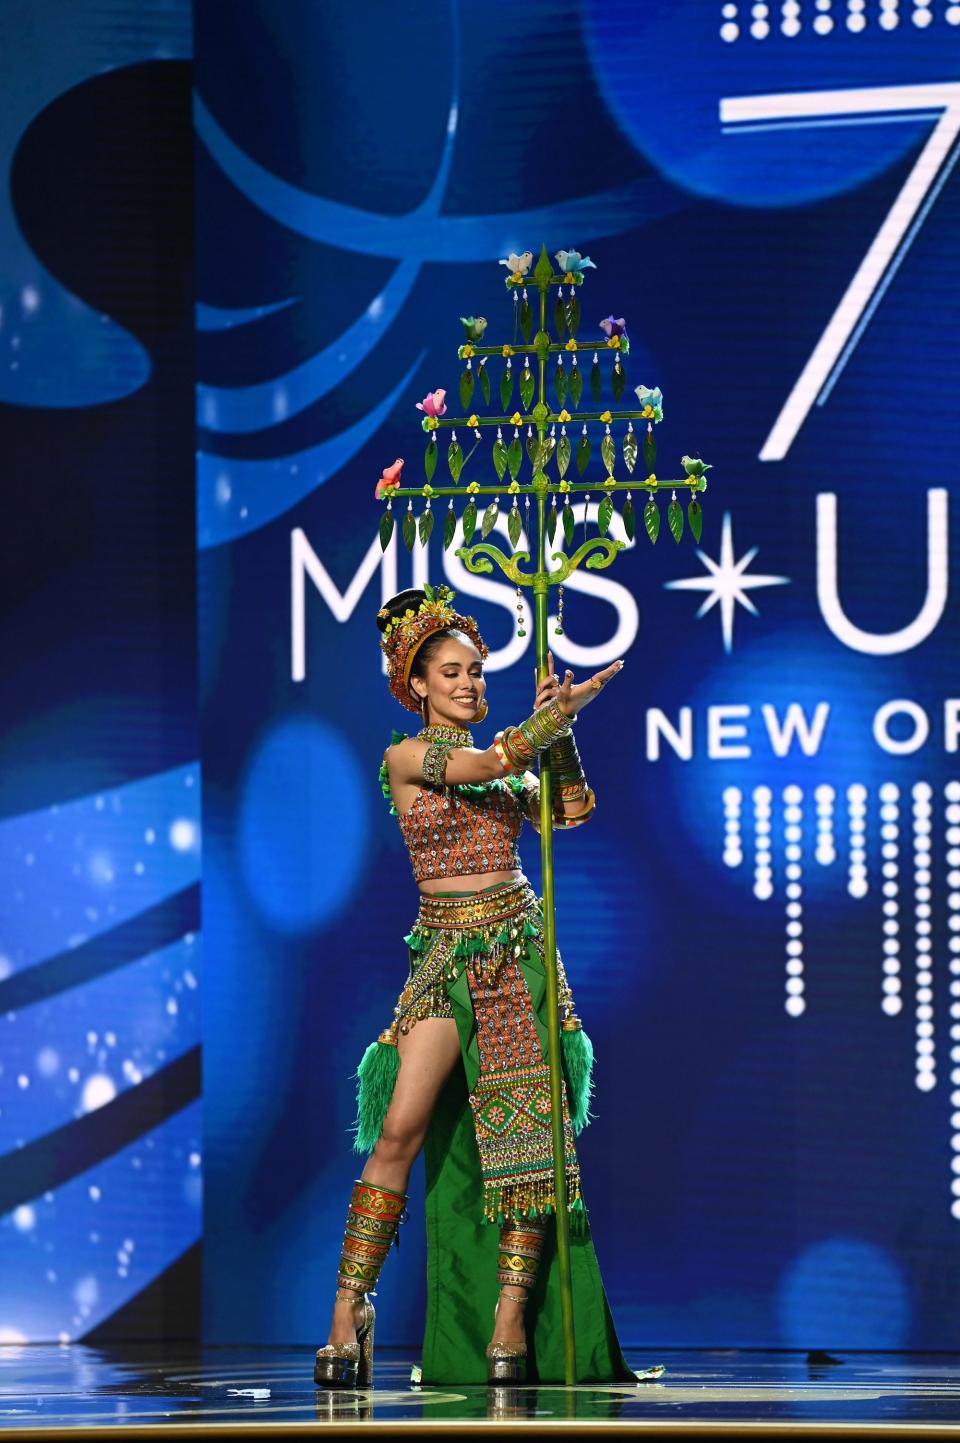 Miss Cambodia in the 2023 Miss Universe Costume Contest.